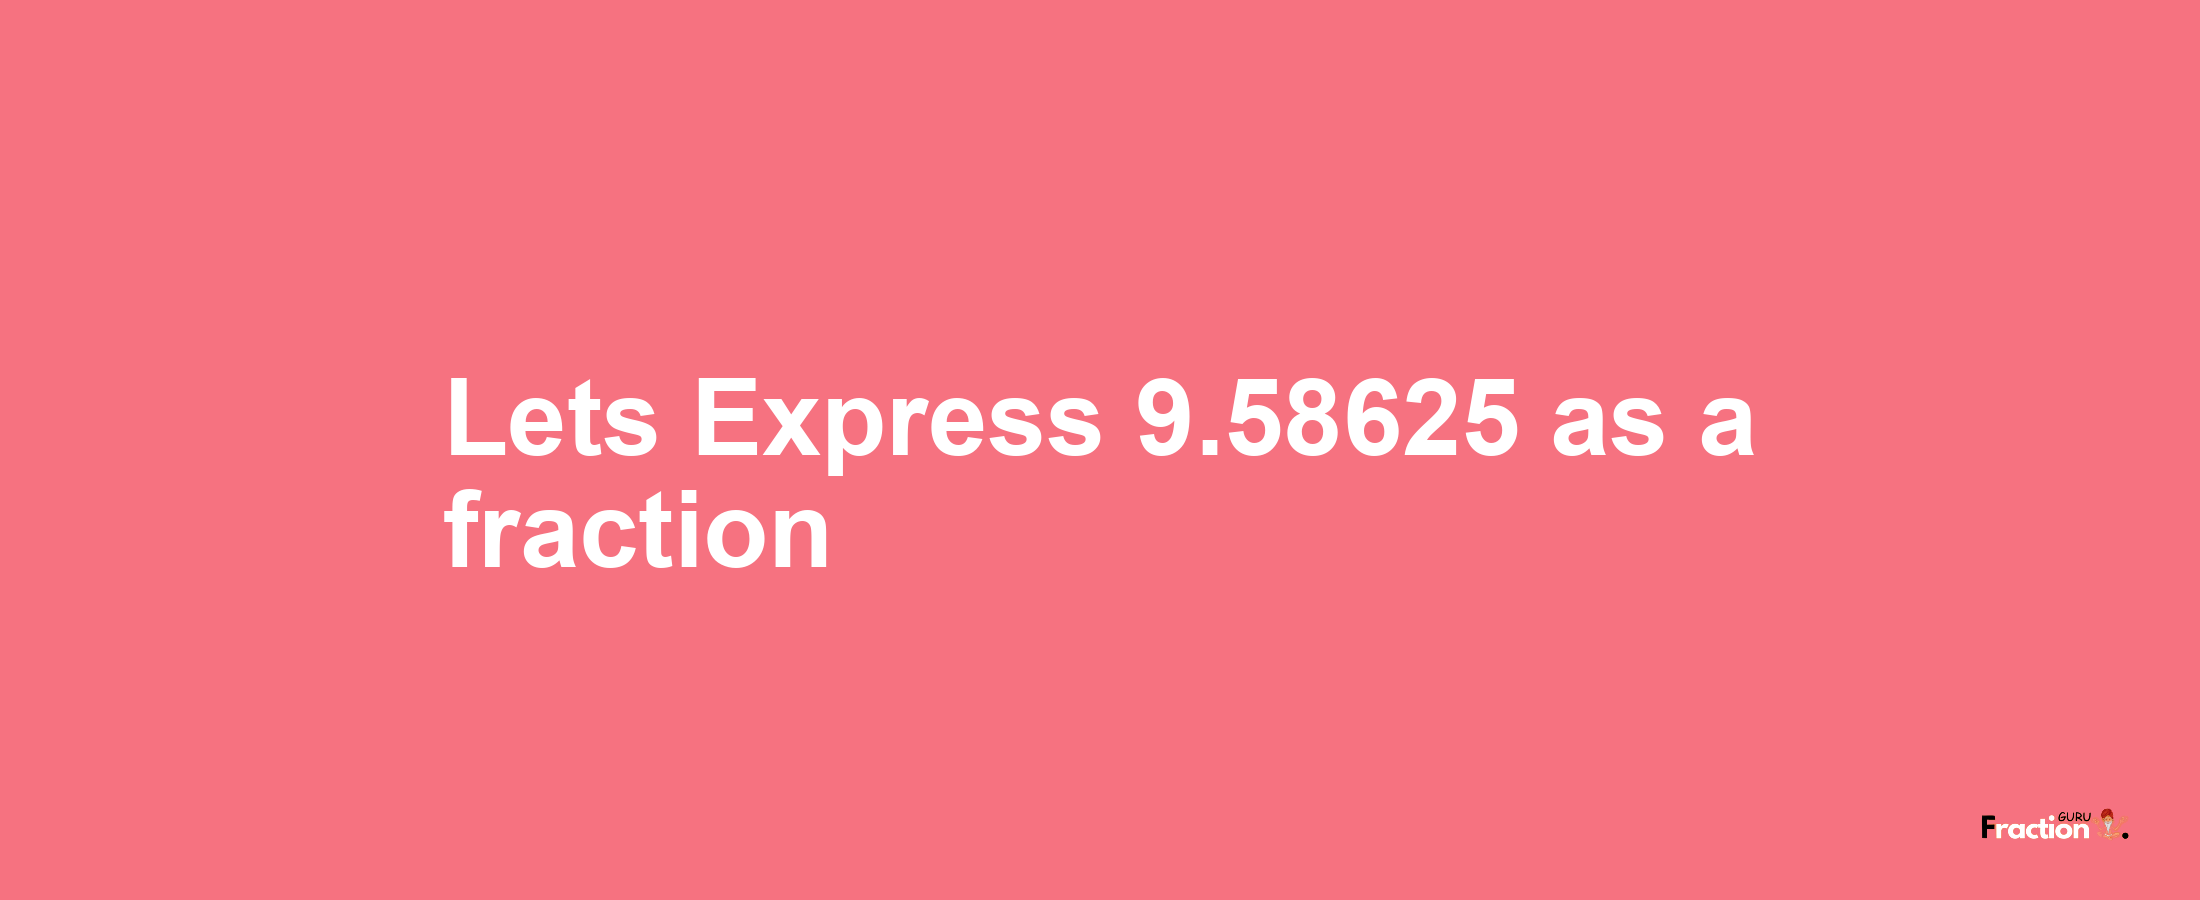 Lets Express 9.58625 as afraction